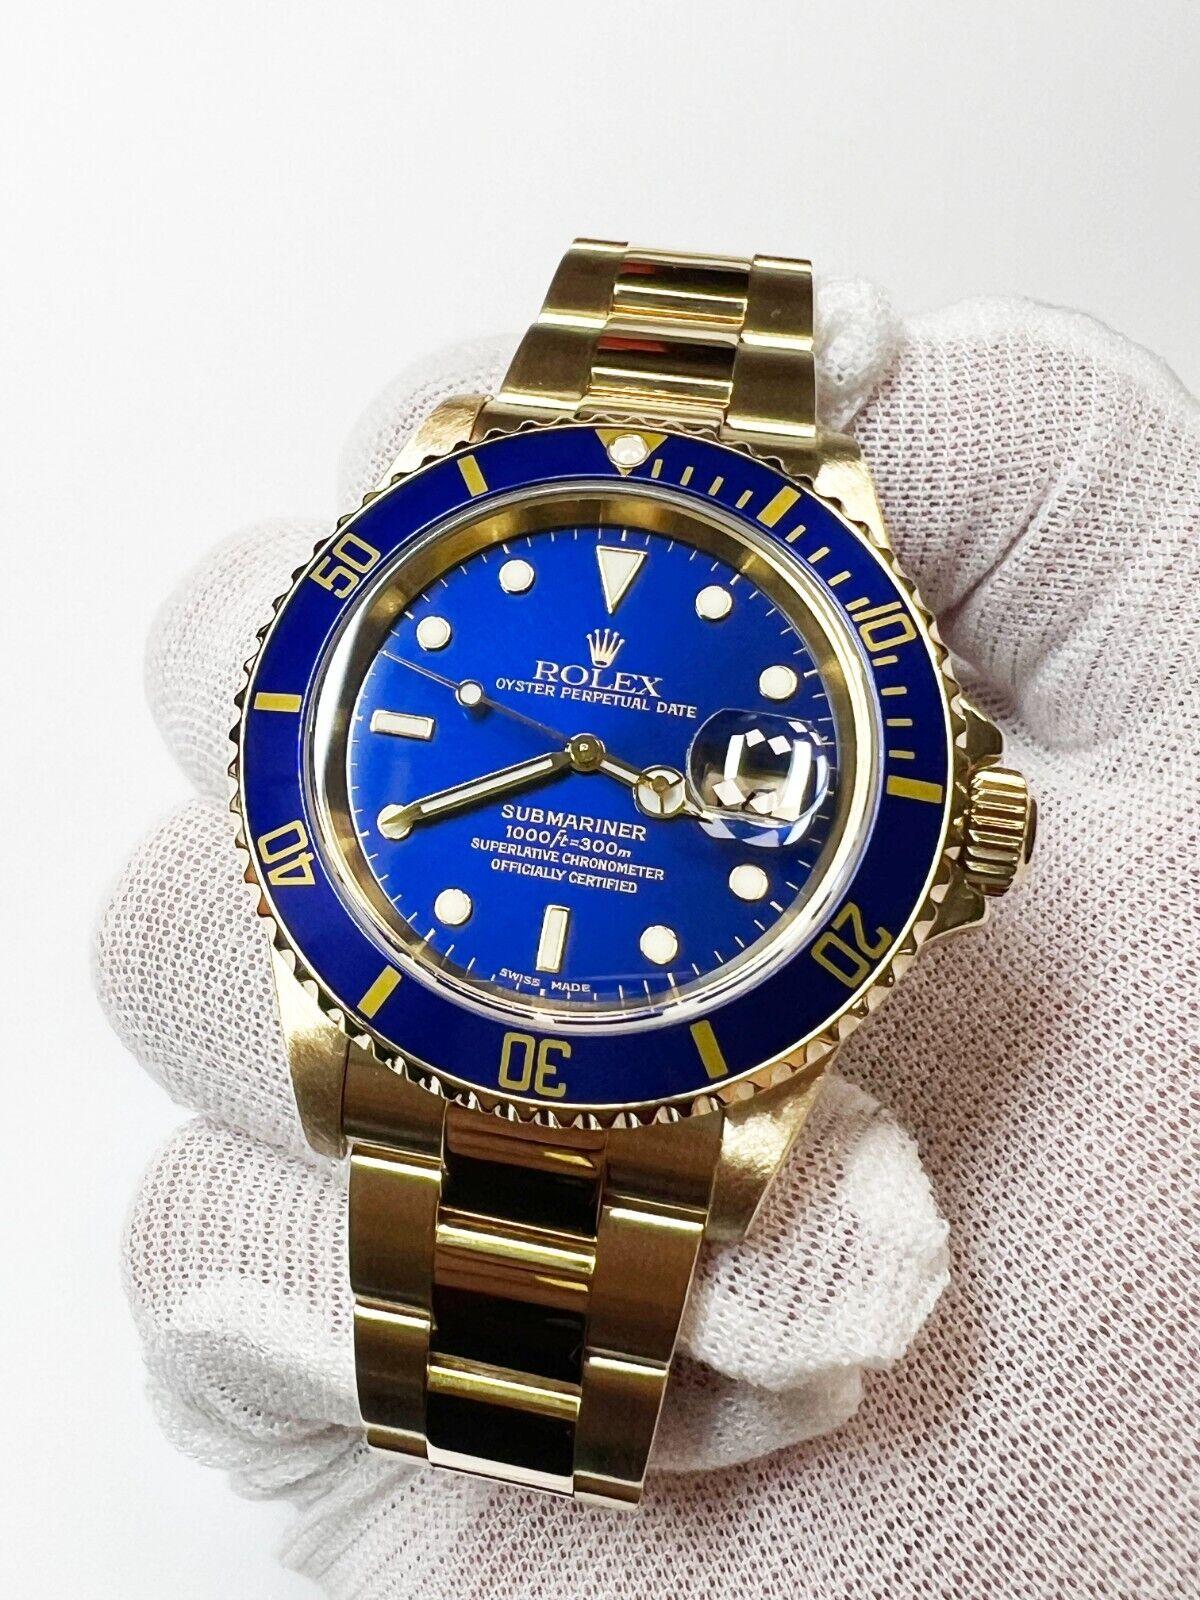 Style Number: 16618

Serial: Y348***

ProductionYear: 2002
 
Model: Submariner
 
Case Material: 18K Yellow Gold
 
Band: 18K Yellow Gold
 
Bezel: Blue
 
Dial: Blue
 
Face: Sapphire Crystal 
 
Case Size: 40mm 
 
Includes: 
-Rolex Box &